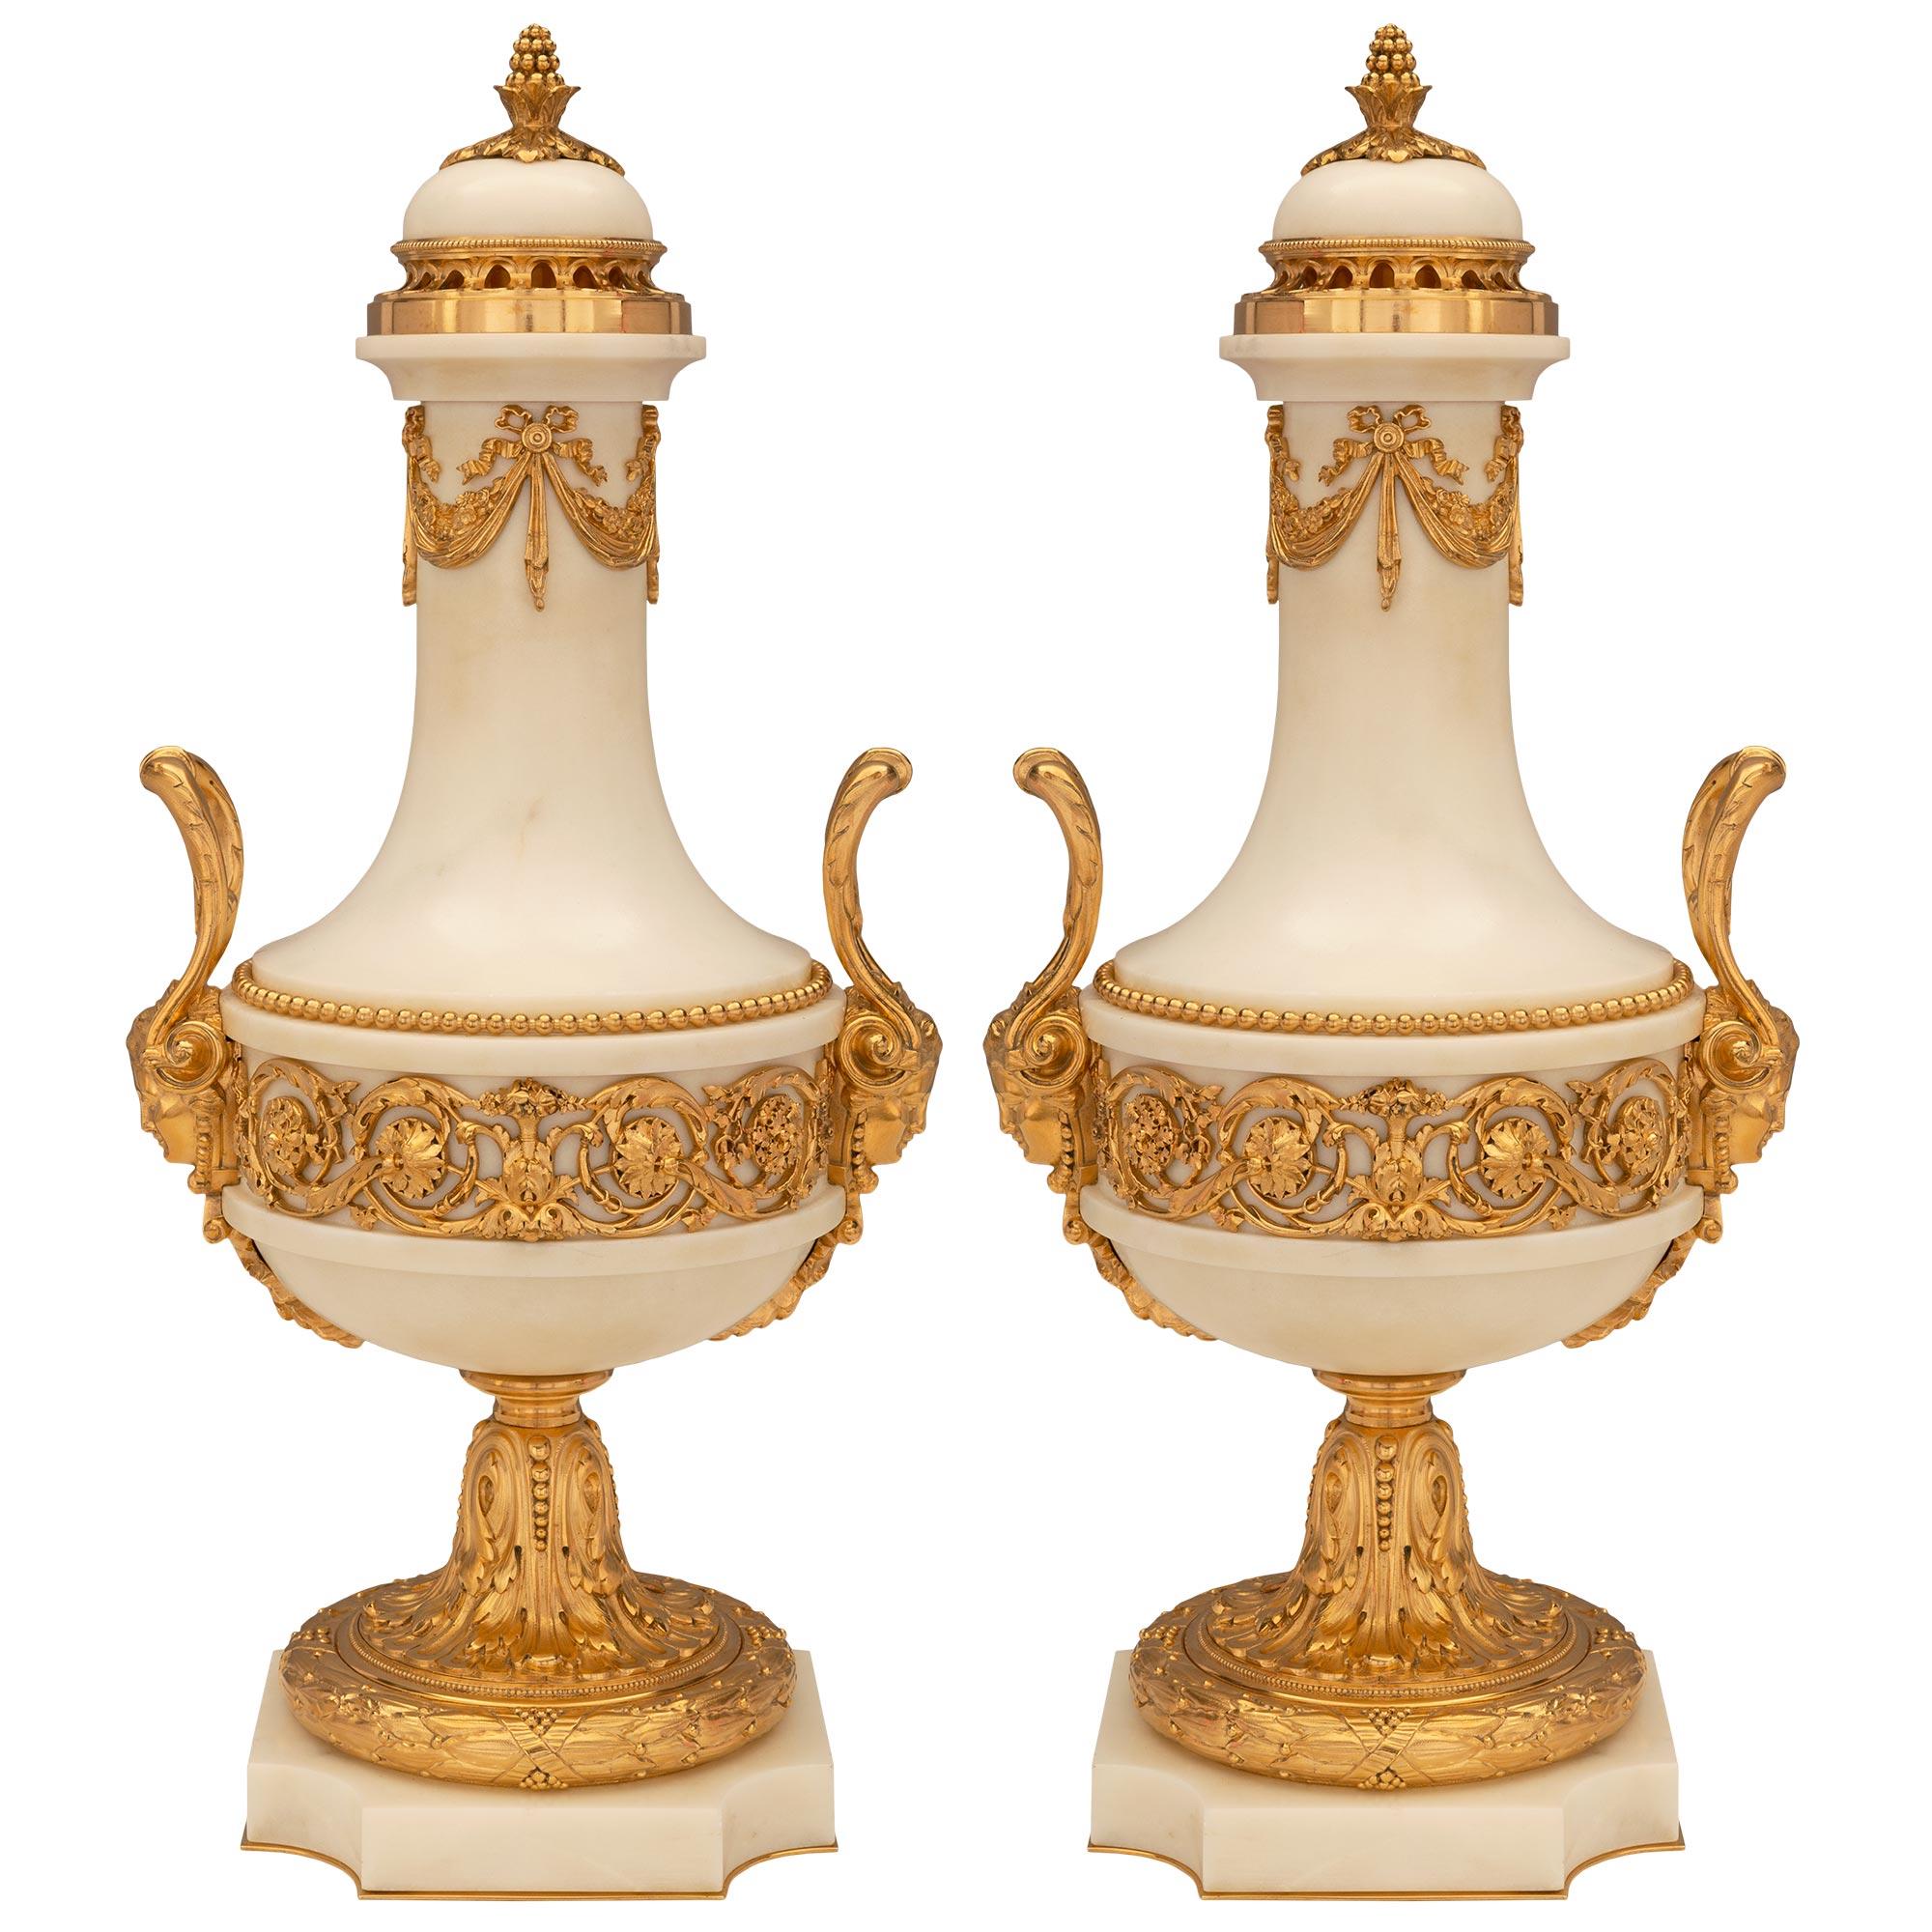 Pair Of French 19th Century Belle Époque Period Marble And Ormolu Lidded Urns For Sale 6